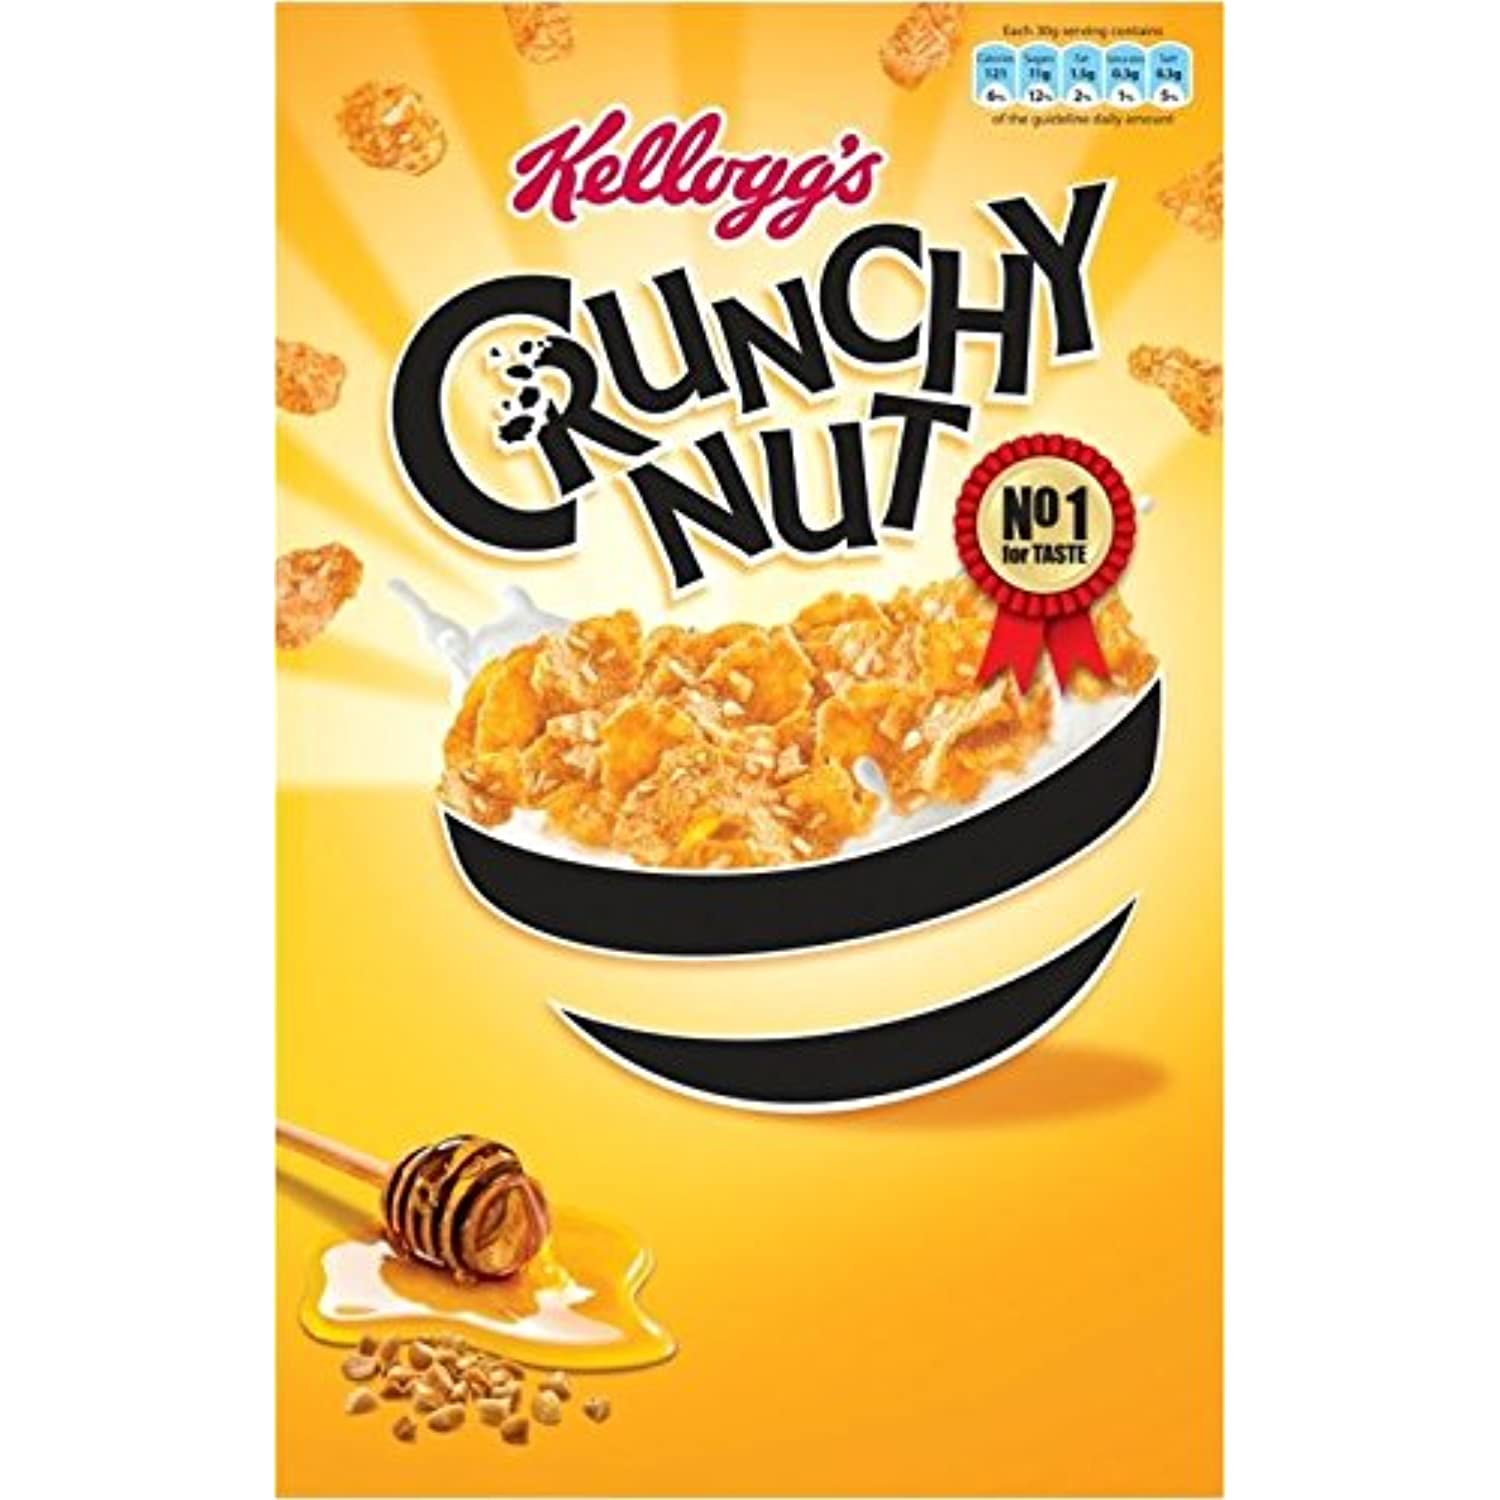 Kellogg's Crunchy Nut Chocolate with Honey and Nut Clusters Cereal